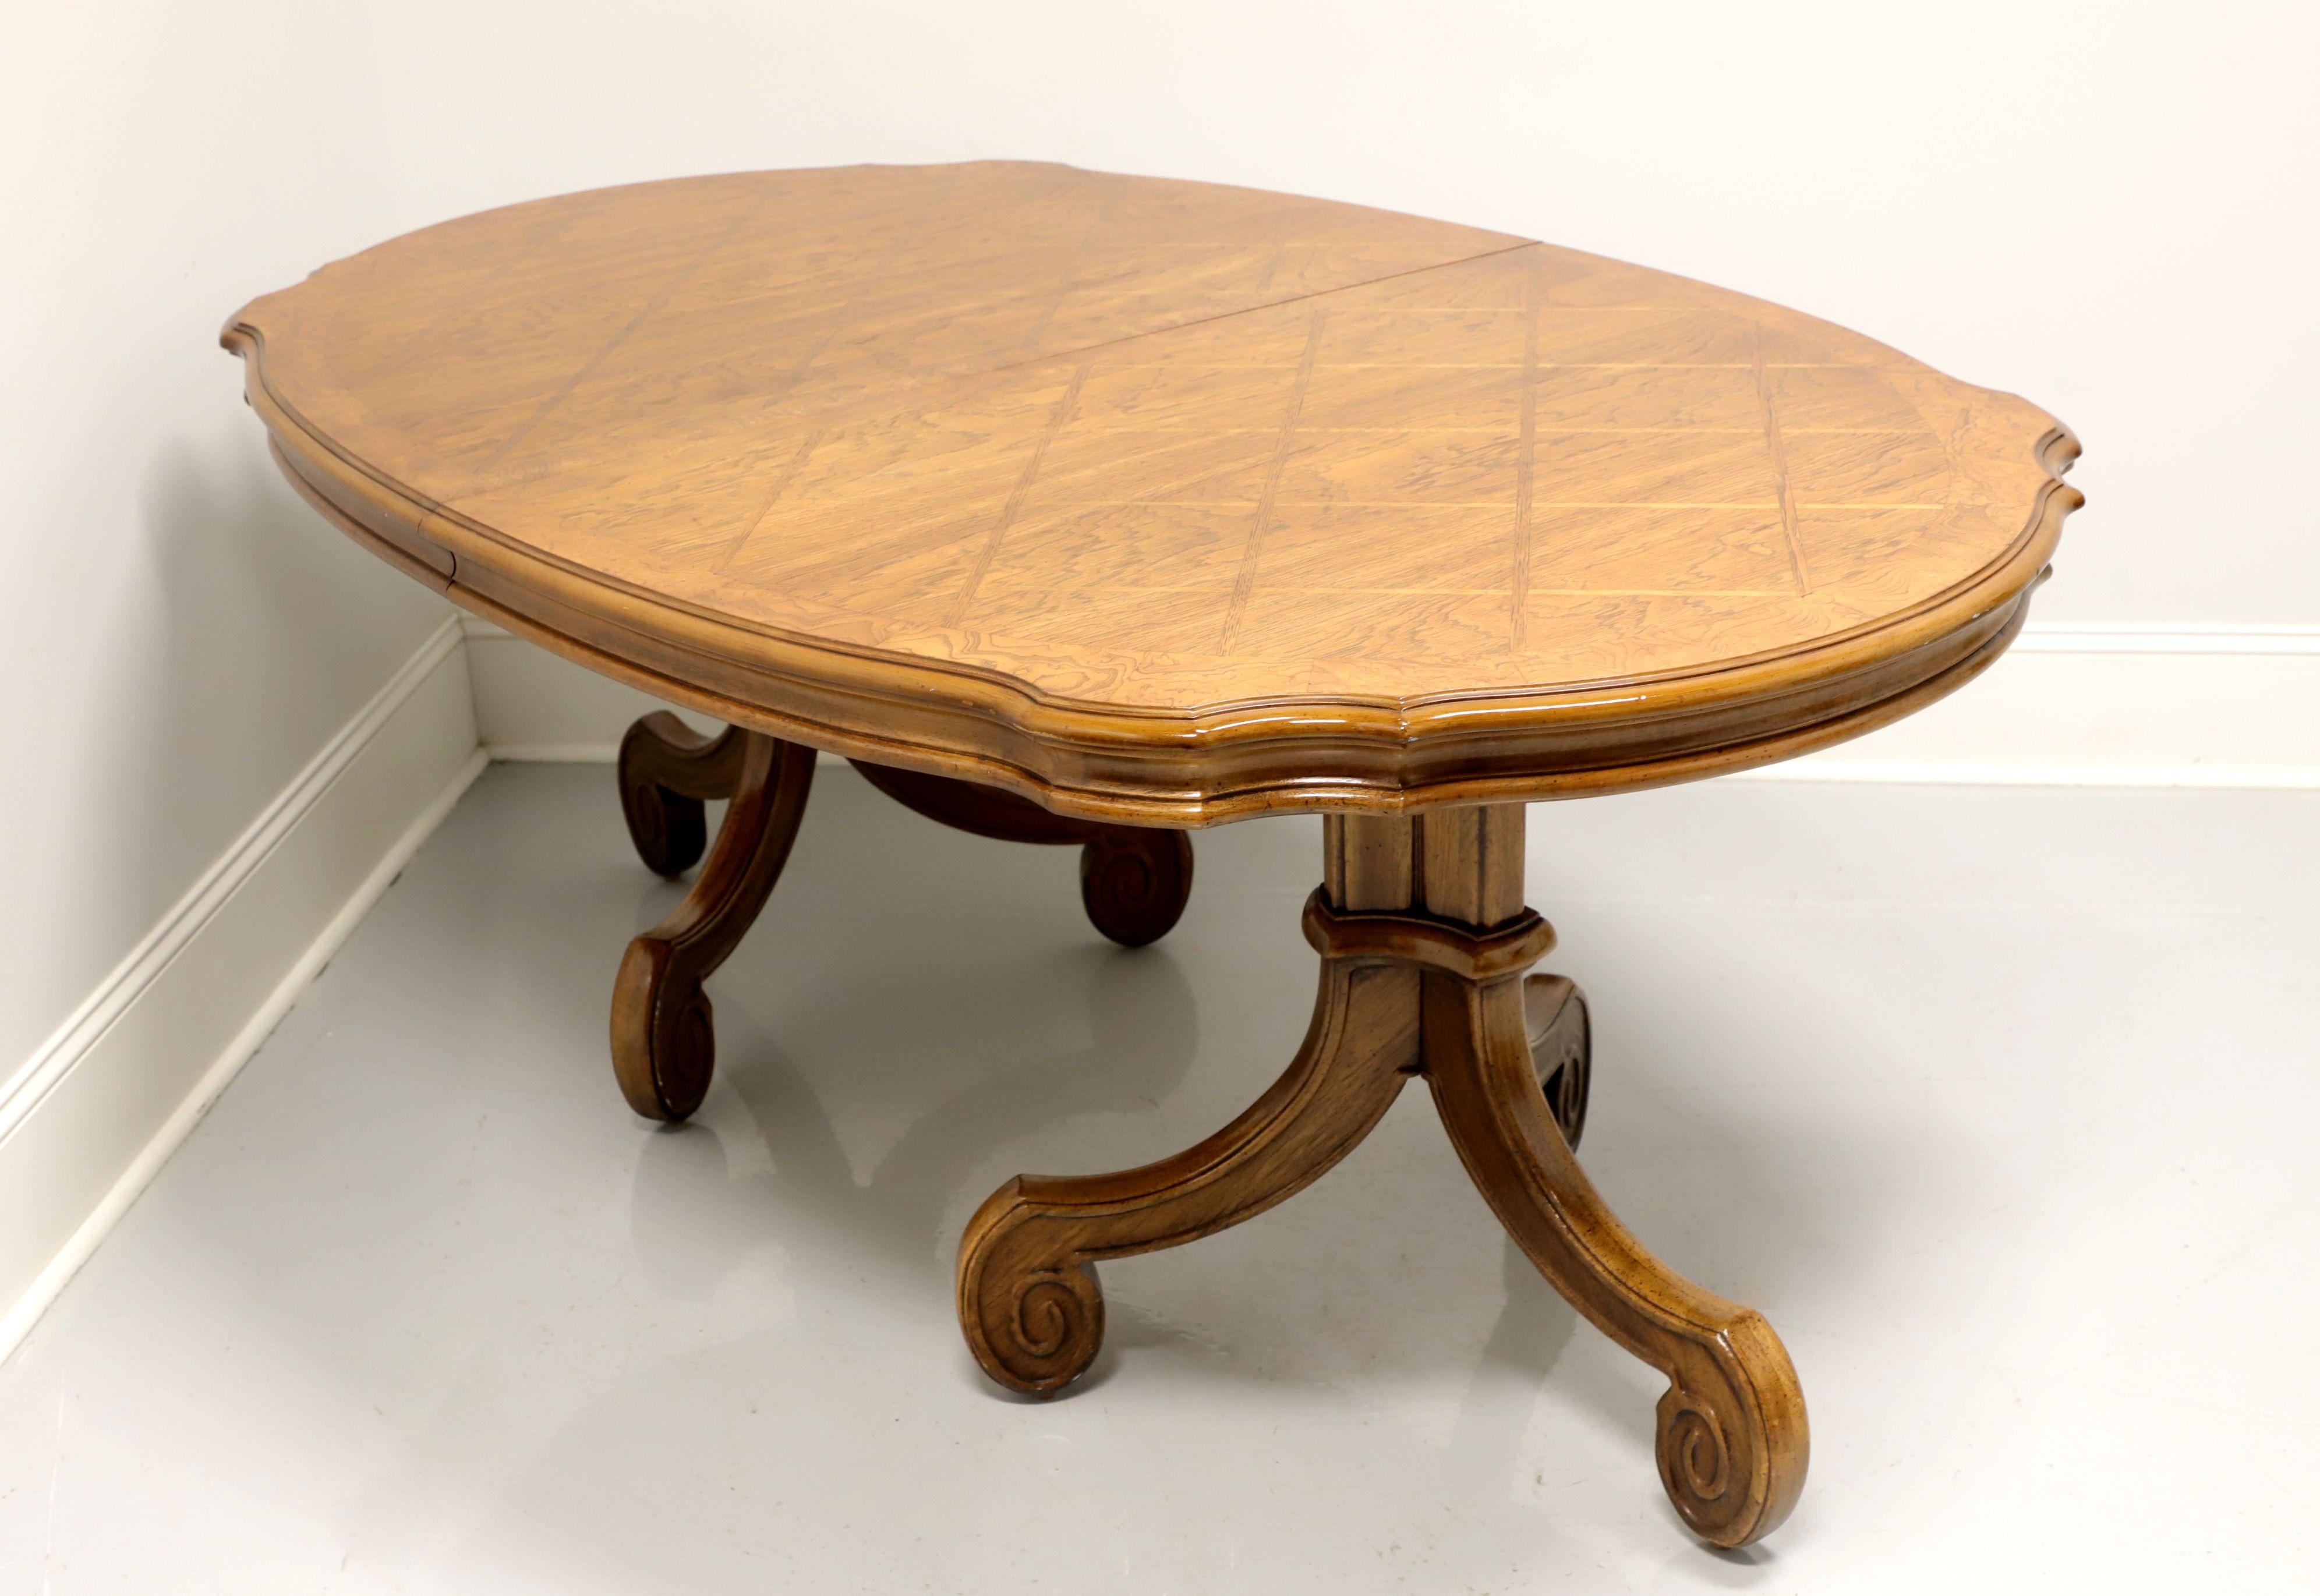 THOMASVILLE Ceremony Collection Mediterranean Walnut Dining Table 4